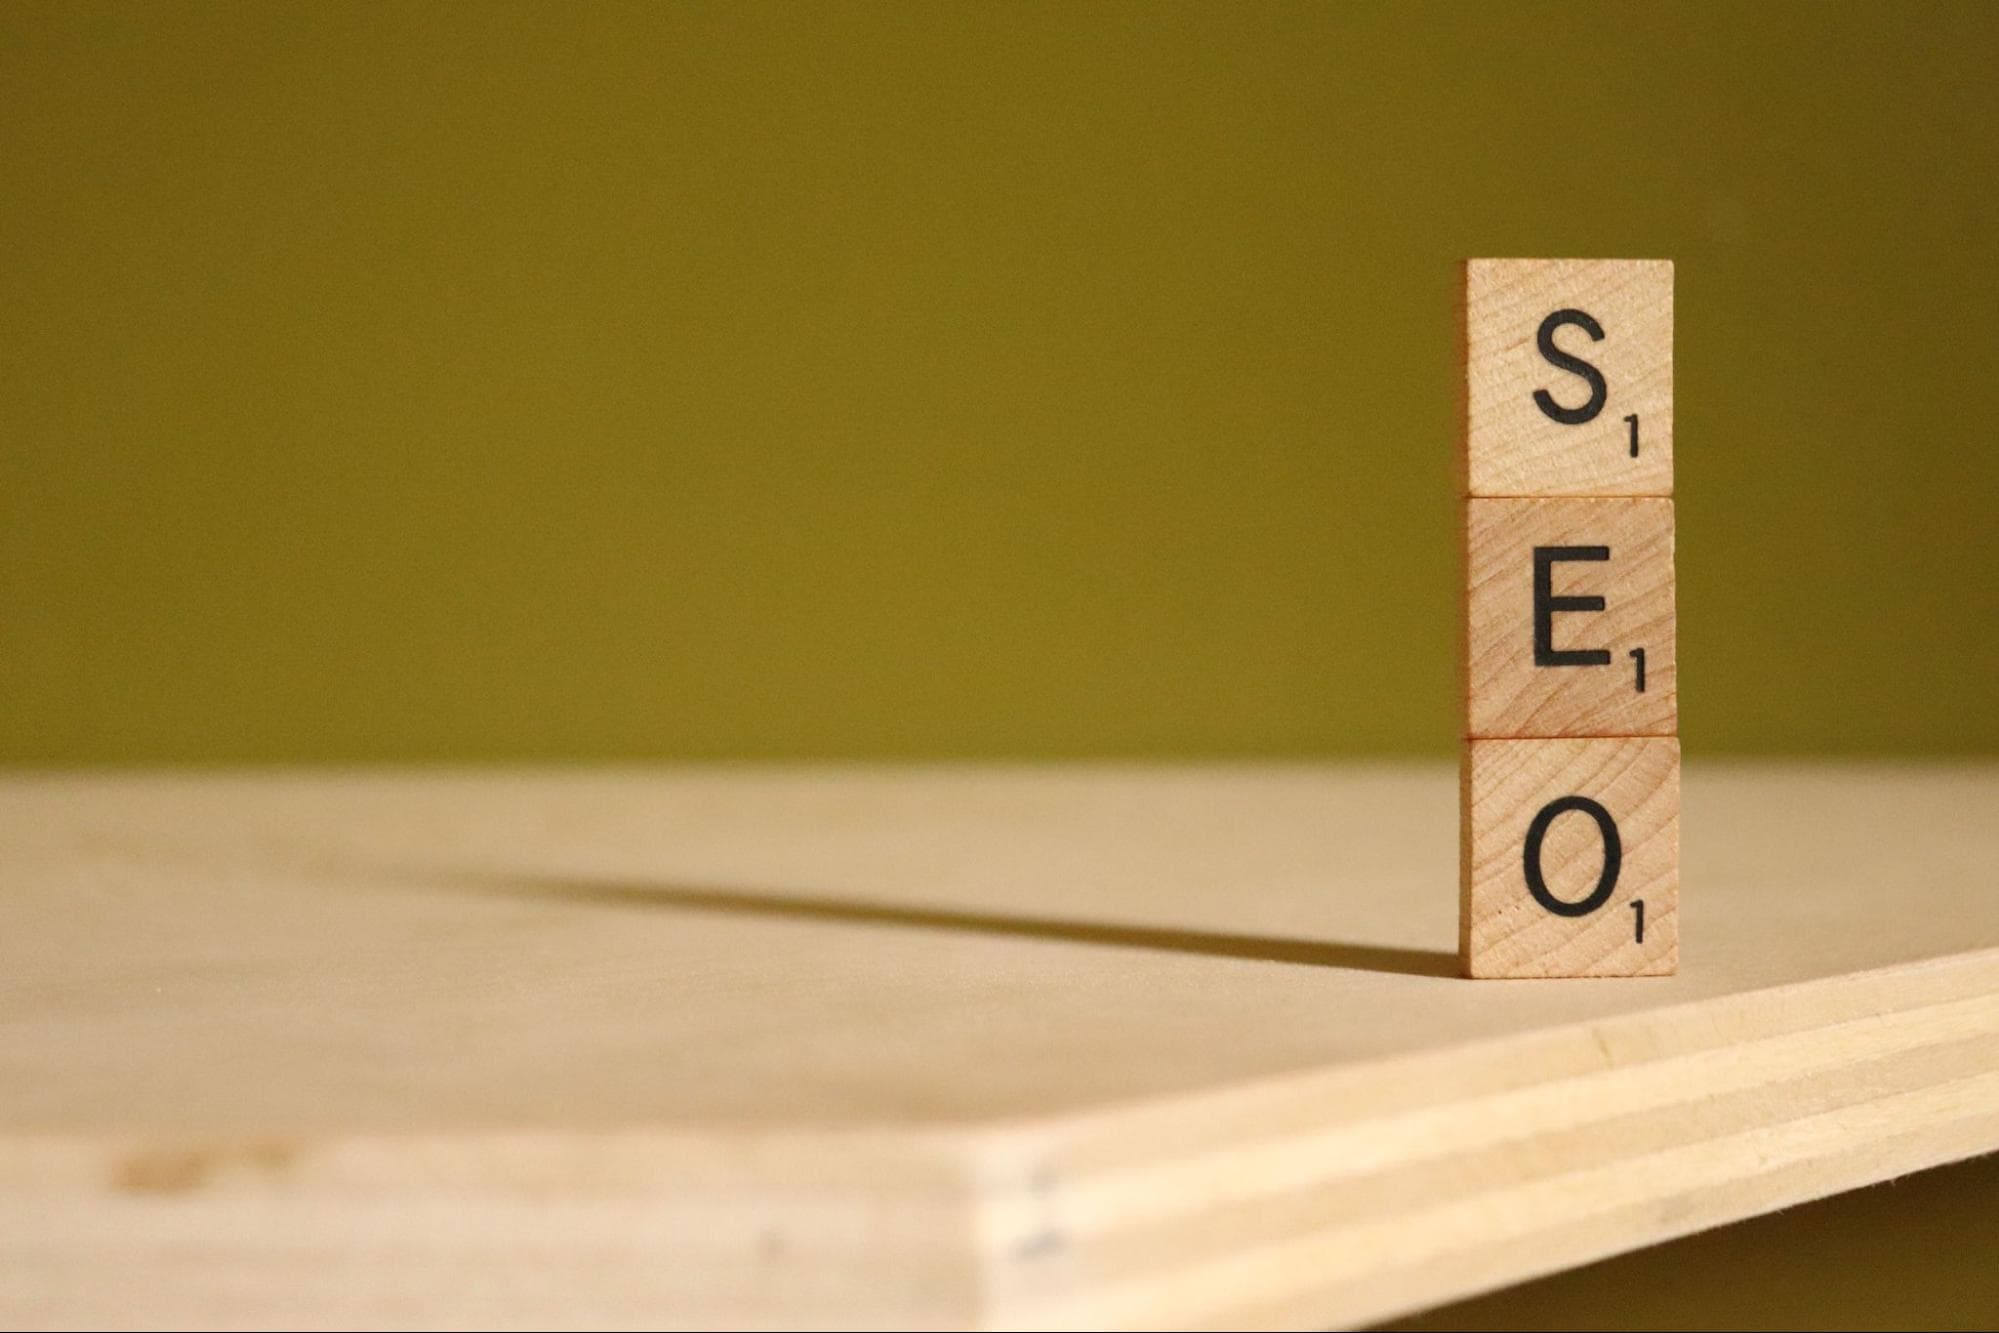 Scrabble pieces spelling out "SEO"